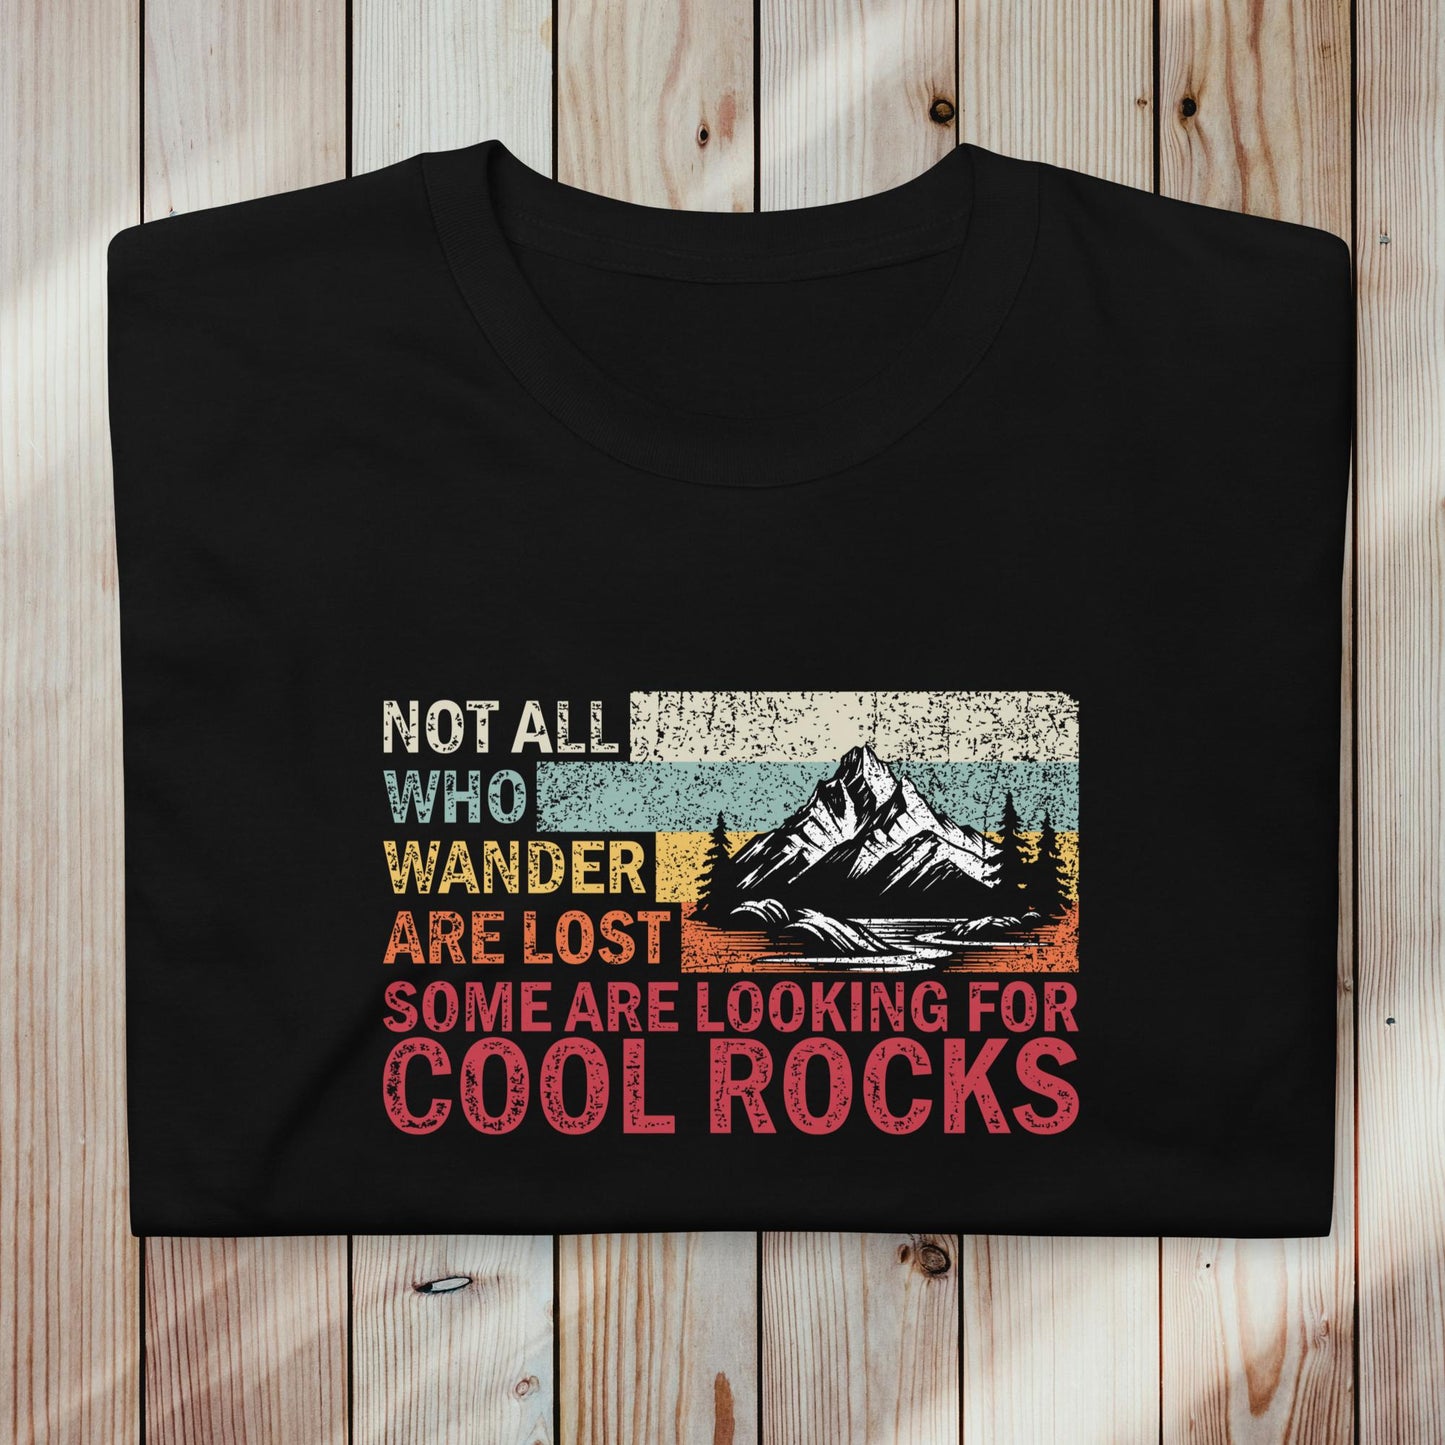 Unisex T-Shirt: "Not all who wander are lost, same are looking for cool rocks"